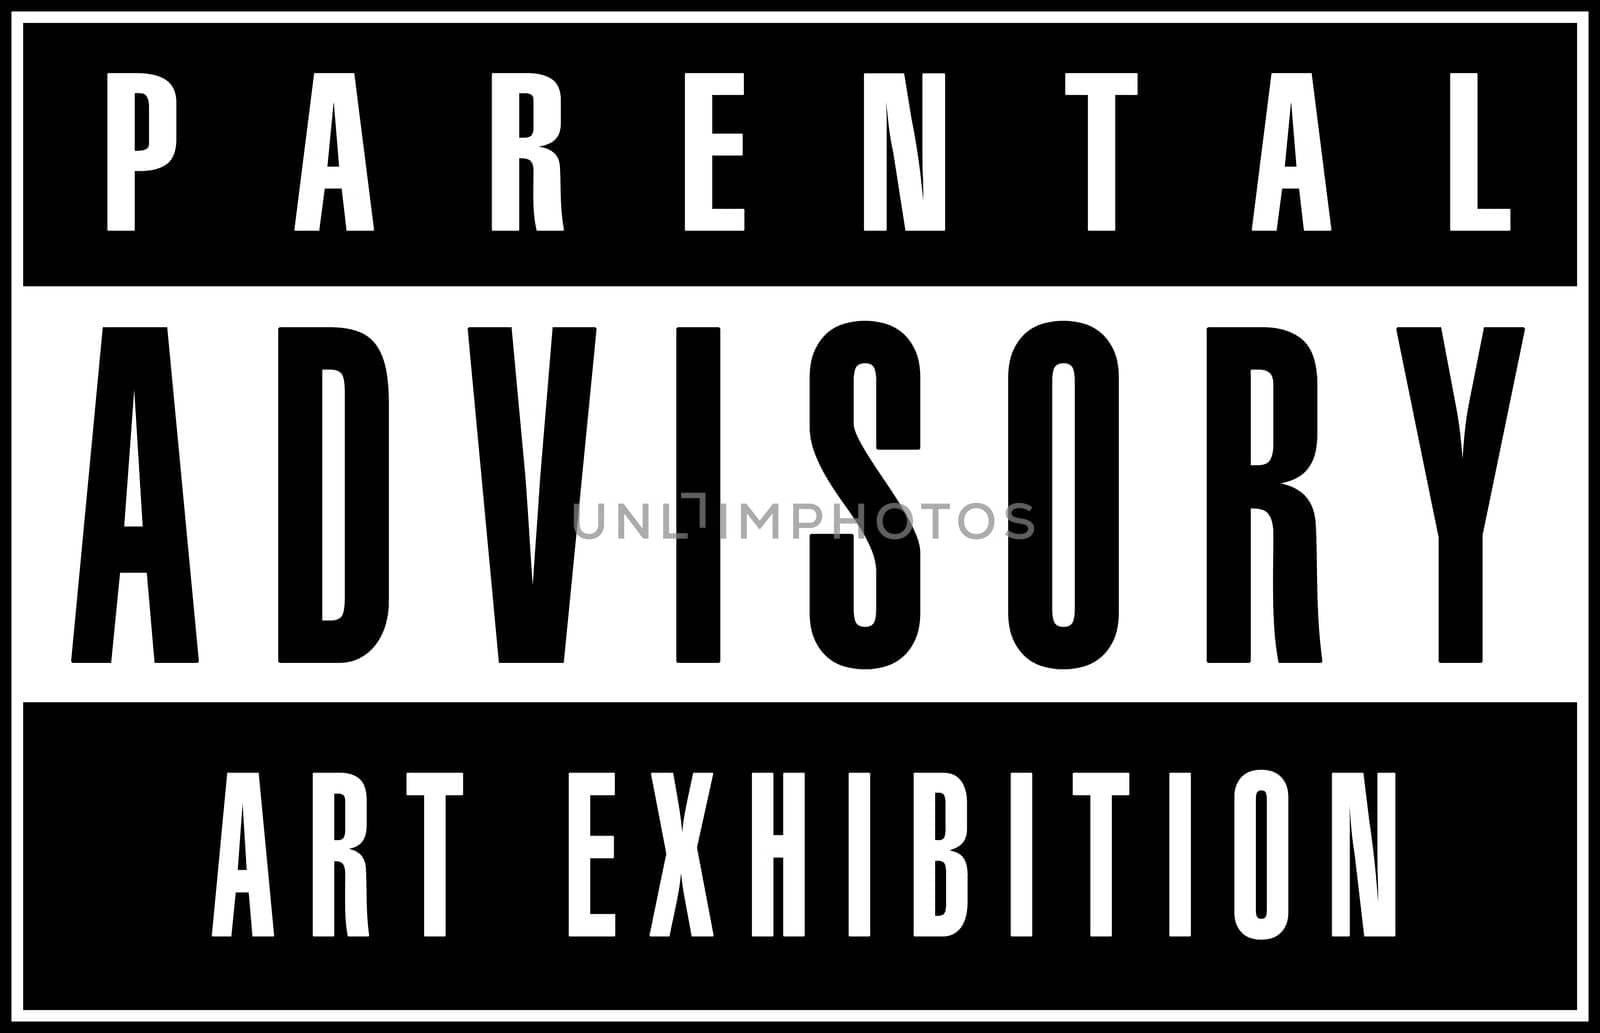 a black and white parental advisory logo. Logo is 100% created by me.